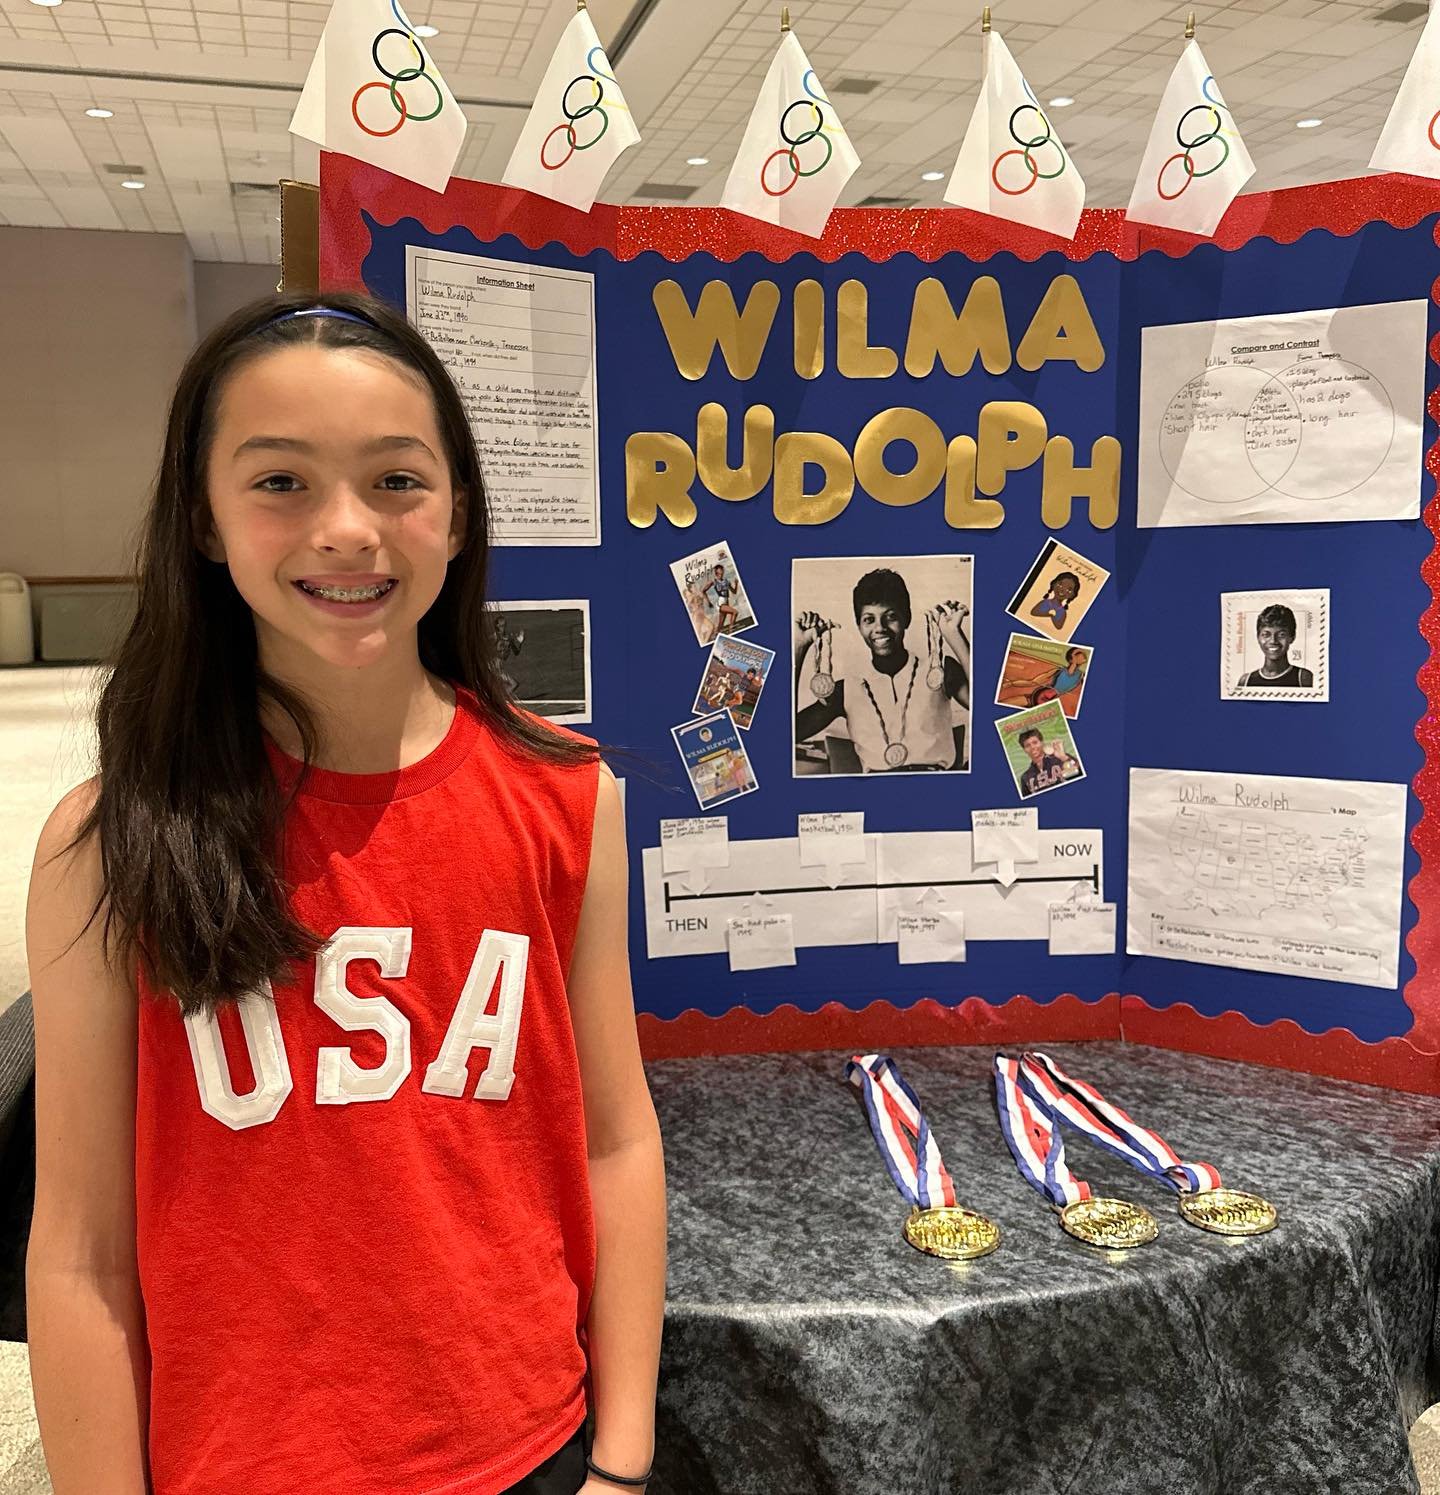 A morning at the museum! Our 4th grade grade students came to life as they presented their
Wax Museum projects about famous Americans. This cross-curricular project integrated reading and social studies skills. Students chose a famous American, read 